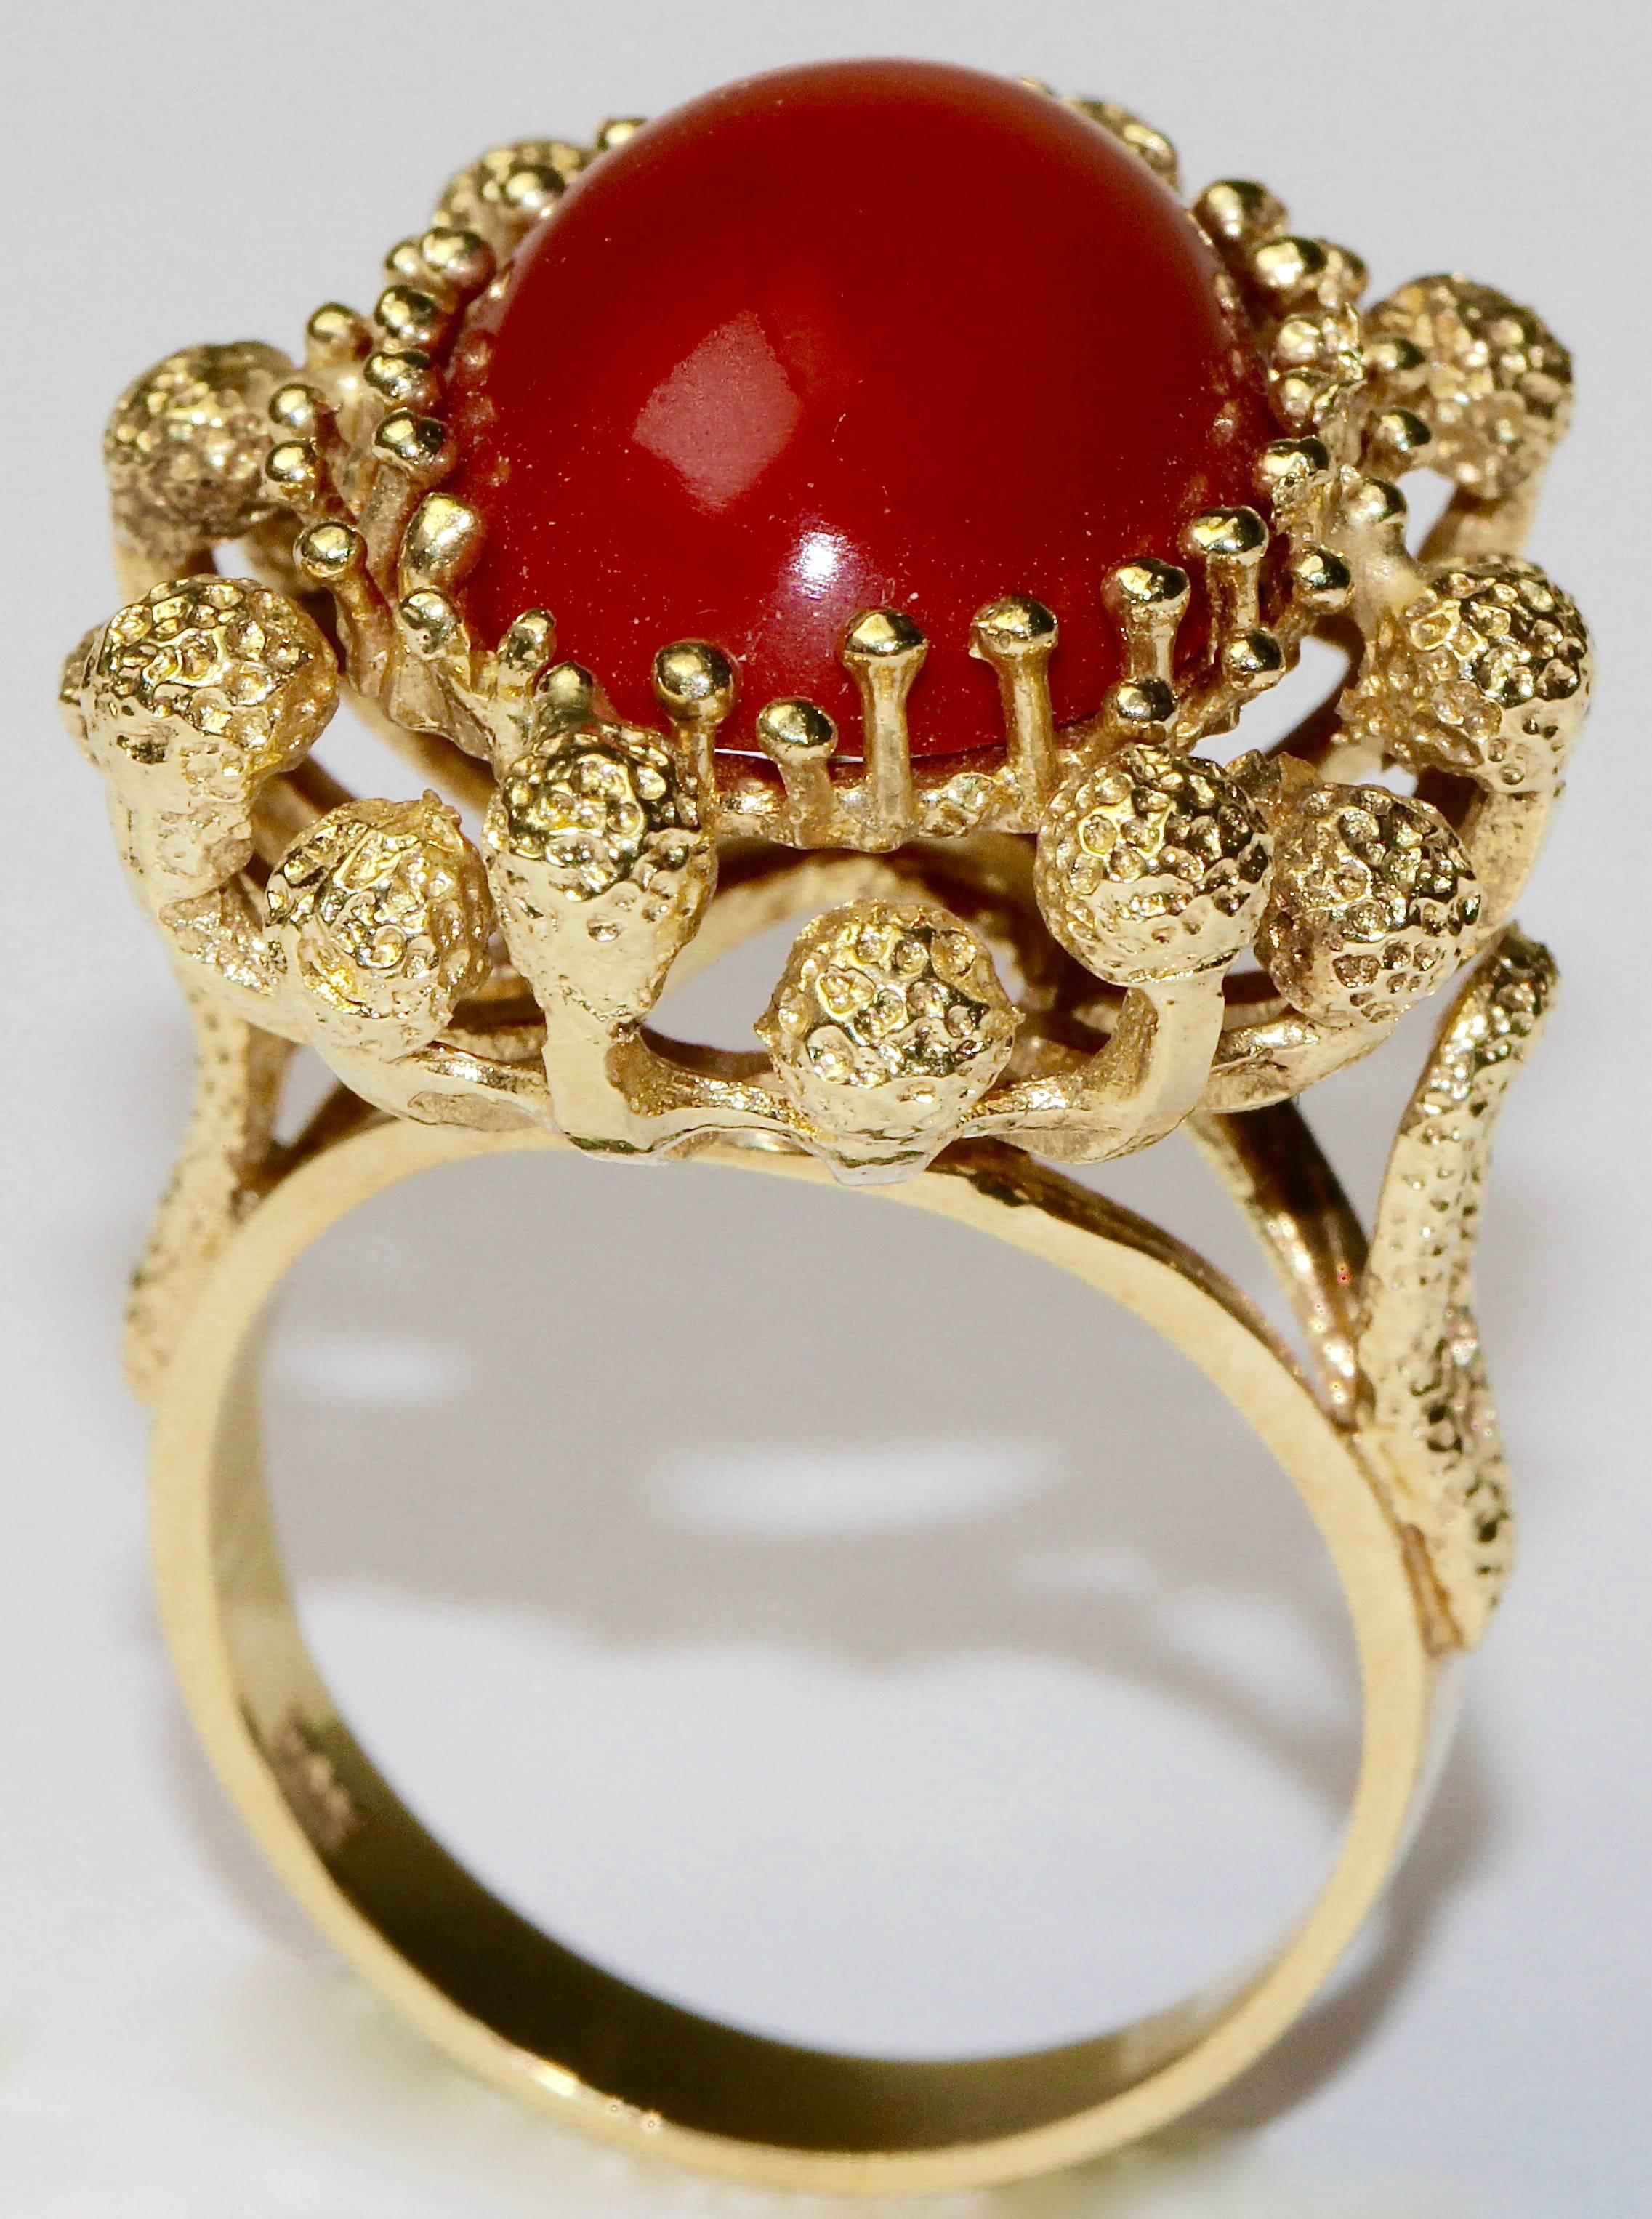 Enchanting gold ring with elaborate setting and large, oval salmon coral.
Hallmarked.

Ring size (diameter): 17mm 